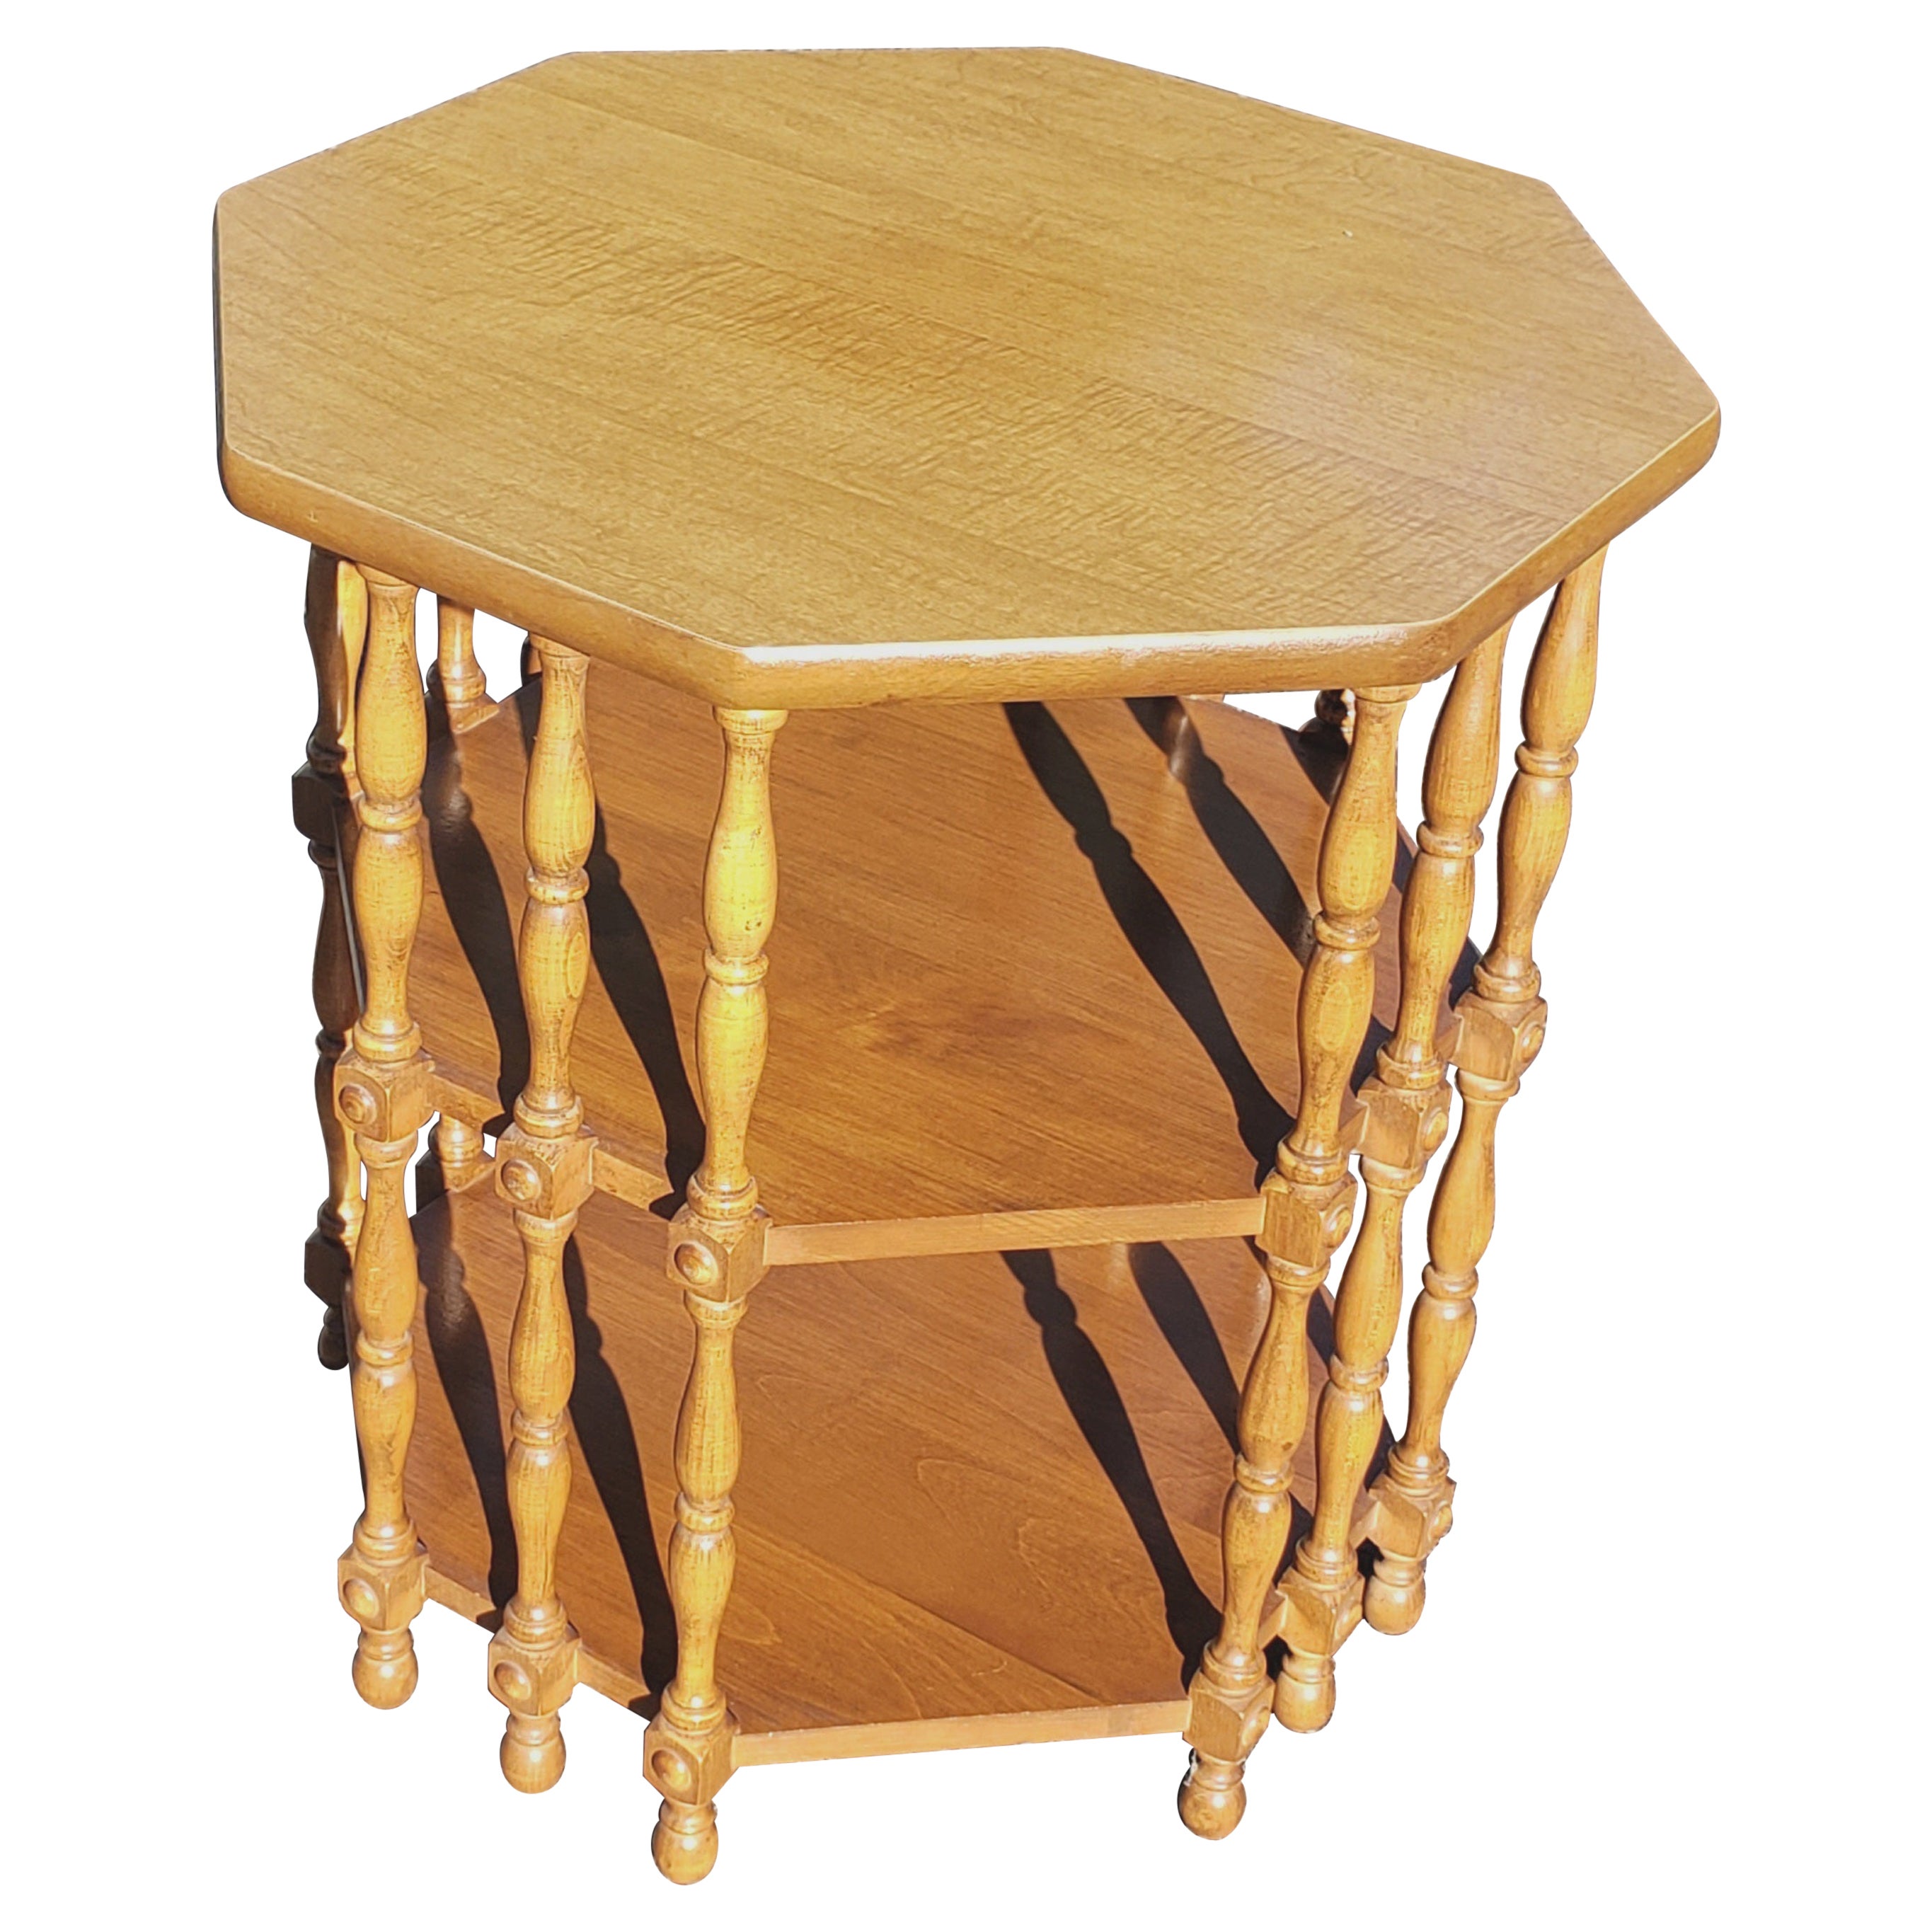 Pennsylvania House Vintage 3 Tier Solid Maple Octagonal Side Table, Circa 1970s For Sale